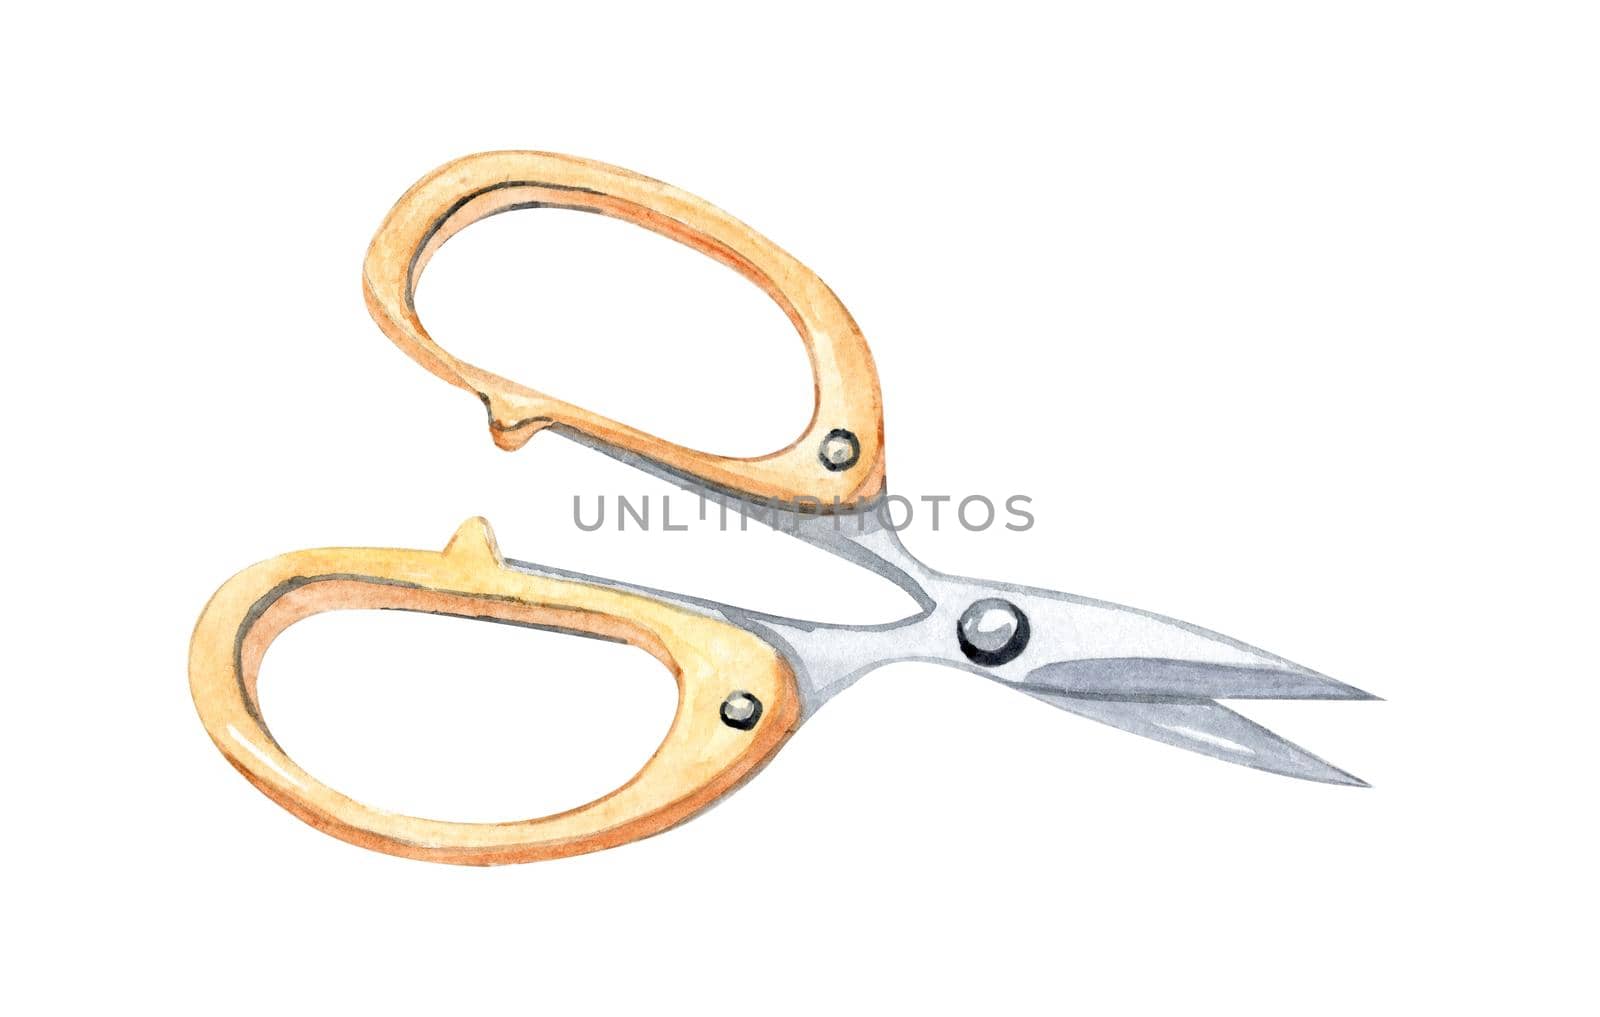 Watercolor yellow scissors isolated on white background by dreamloud